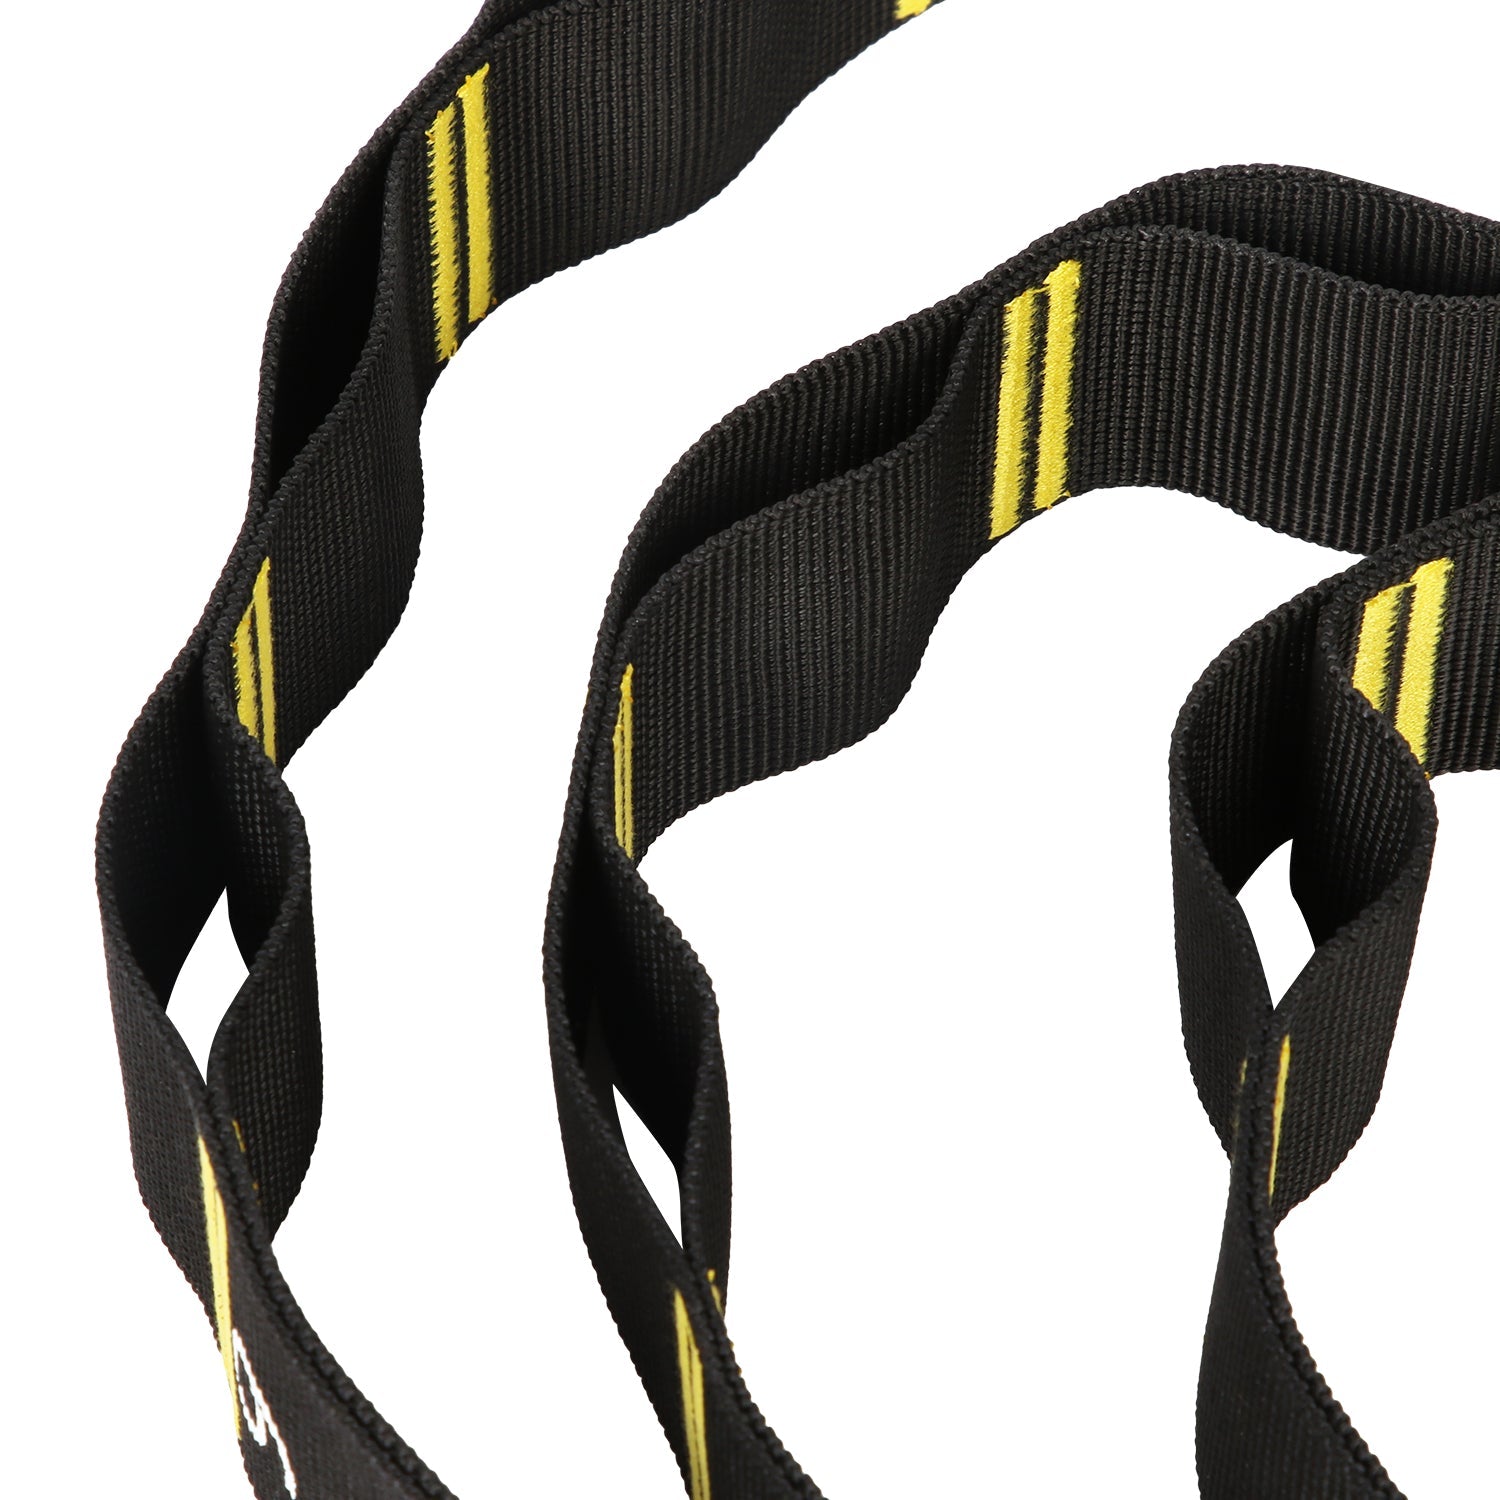 GND Replacement Carabiner Straps For Gym Rings - Gym Rings- GND Fitness